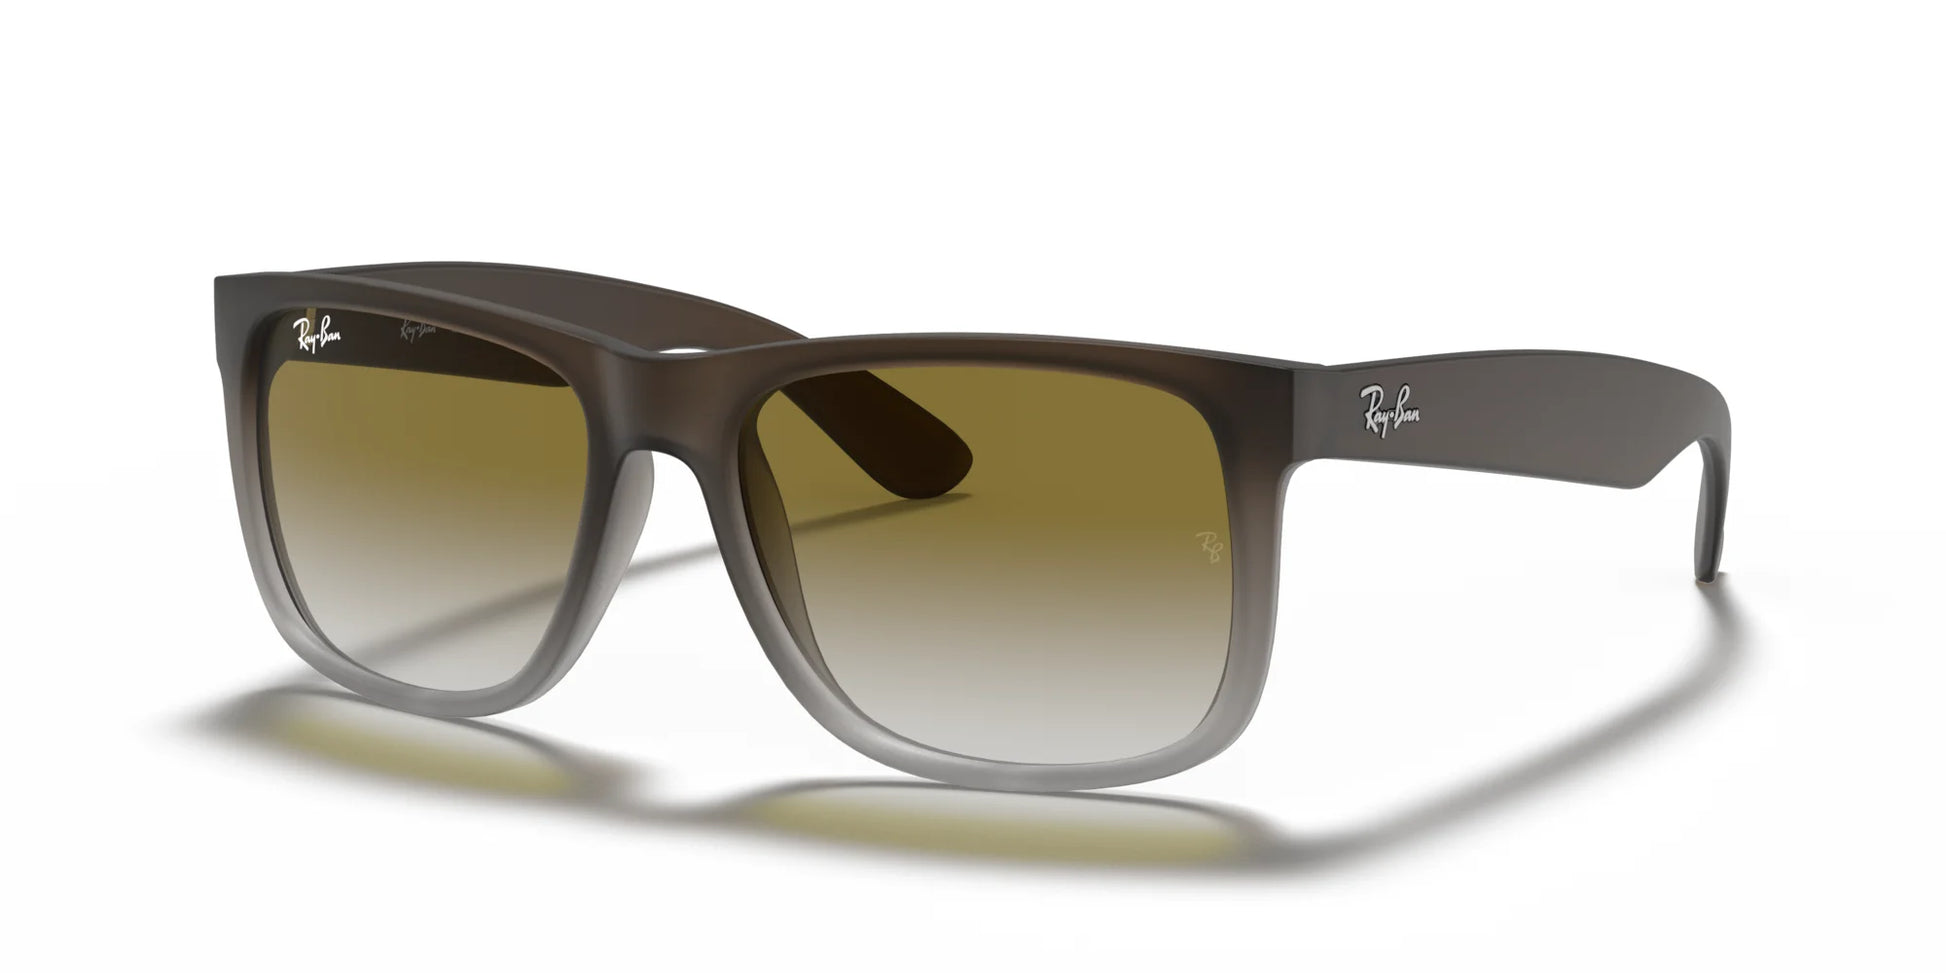 Ray-Ban JUSTIN RB4165 Sunglasses Brown / Green Gradient